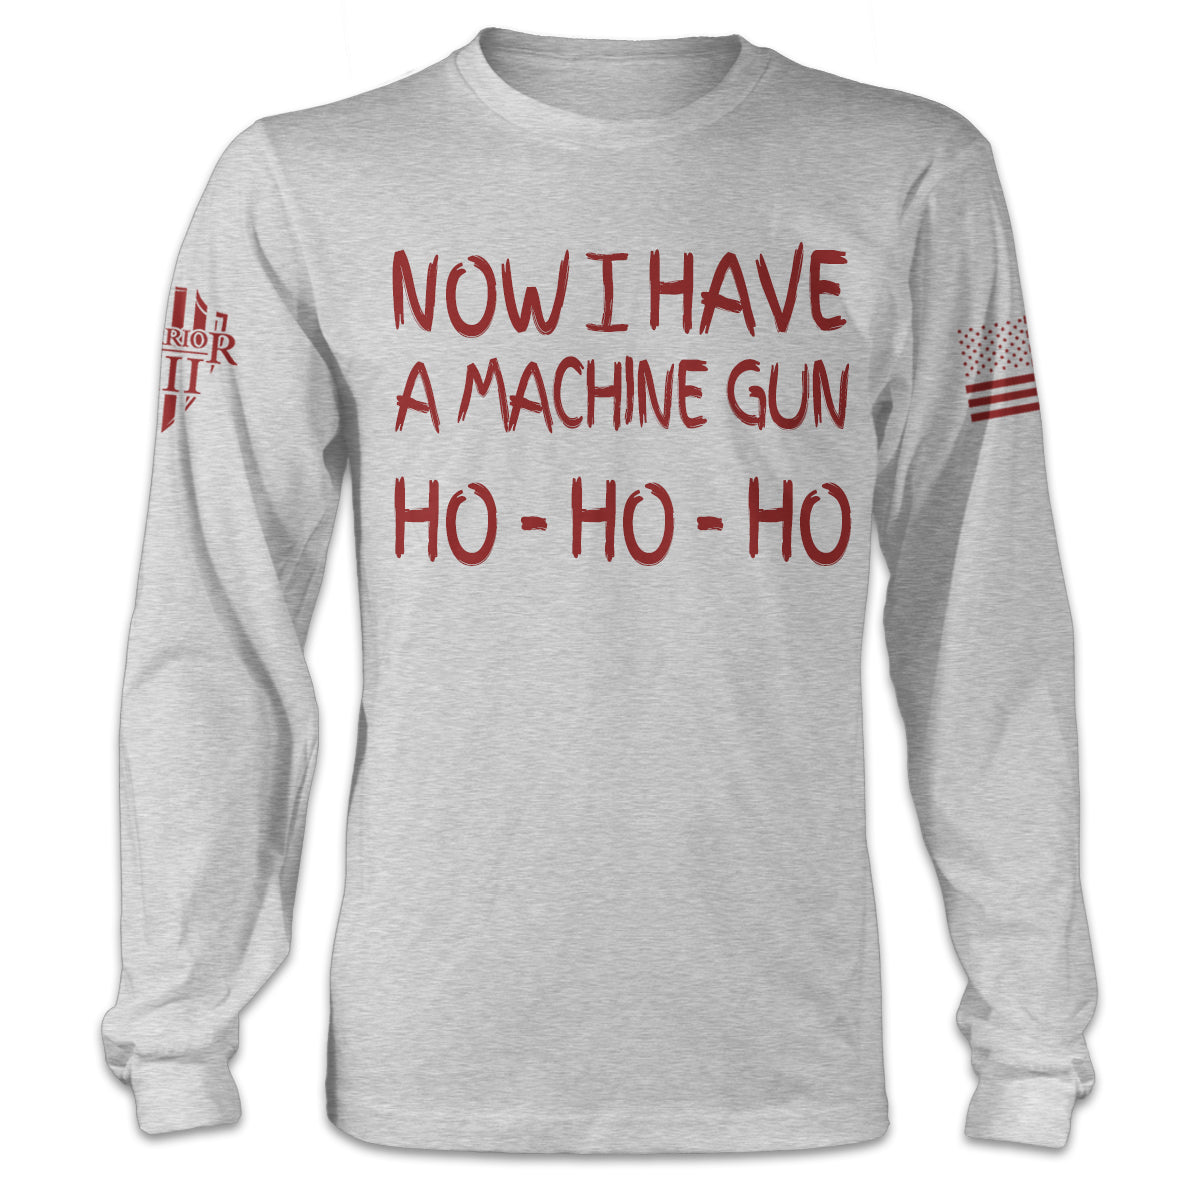 "Now I Have A Machine Gun - Long Sleeve" is printed on a grey t-shirt with the main design printed on the the front and the back of this t-shirt has no printing. This shirt features our brand logo on the right sleeve and the American Flag on the left sleeve.